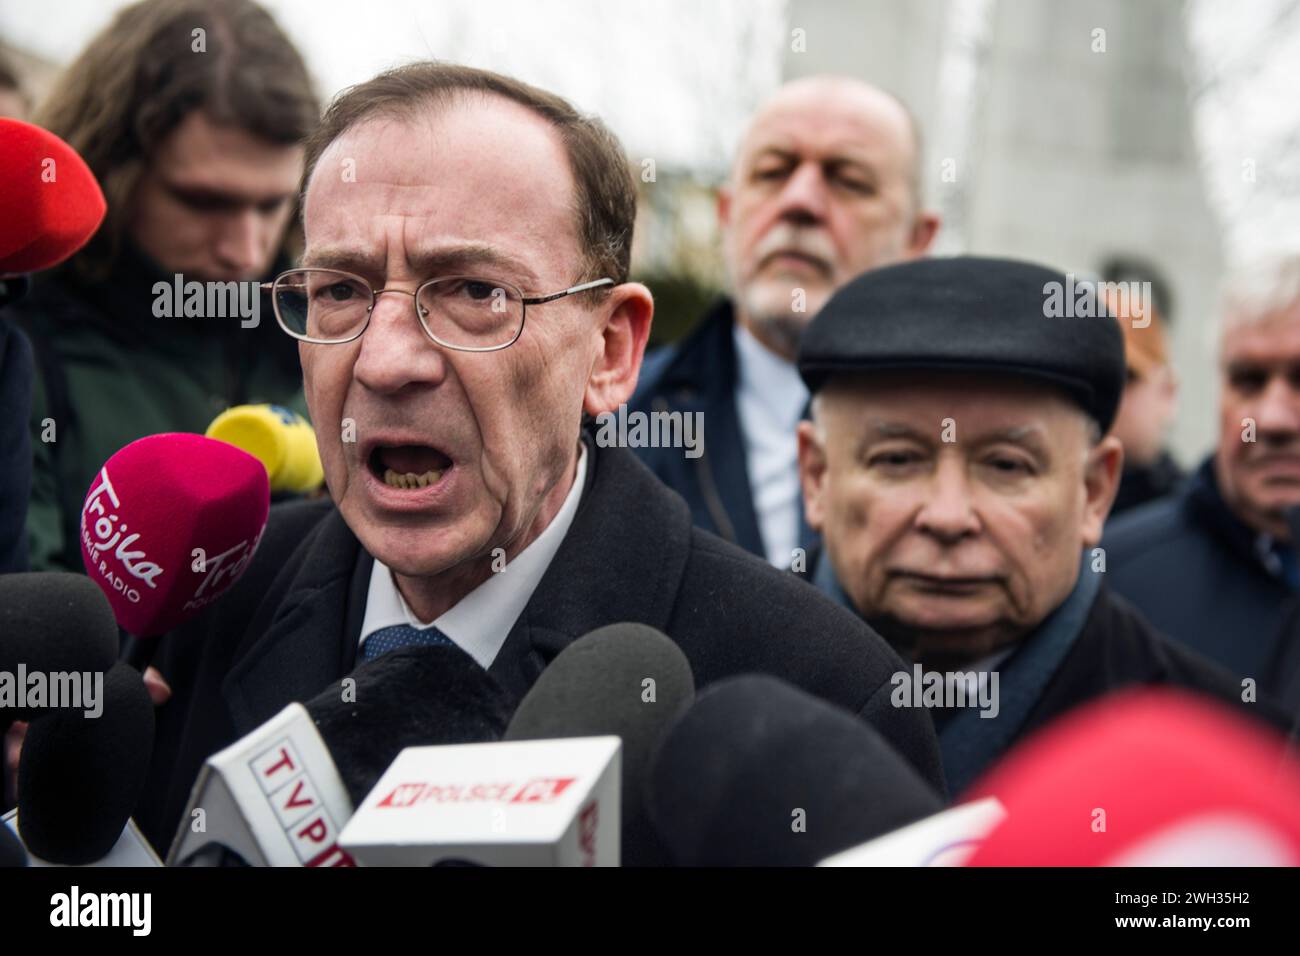 Former Minister of Interior and Administration, Mariusz Kaminski who is released from prison after a second presidential pardon speaks to the media outside the Parliament. Former interior minister, Mariusz Kaminski and his deputy Maciej Wasik were jailed last month after being sentenced for abuse of power for actions taken in 2007, when they served in an earlier Law and Justice-led government and previously led the Central Anti-Corruption Bureau (CBA). They claimed to be 'political prisoners' and they also lost their parliamentary mandates.They tried to push their way into parliament, supporte Stock Photo